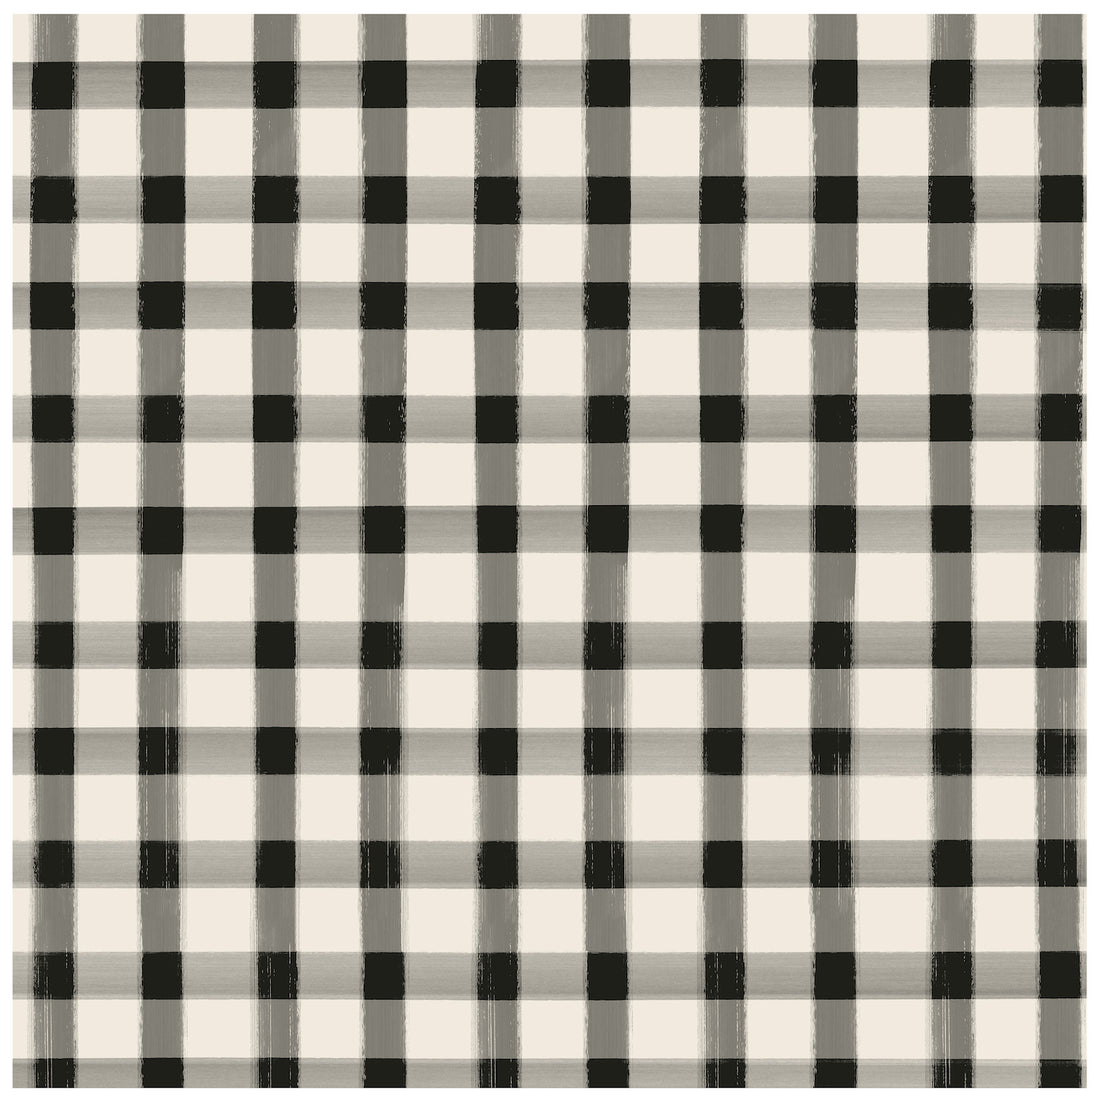 A square cocktail napkin featuring a painted gingham grid check pattern made of gray lines intersecting at black squares, on a white background.